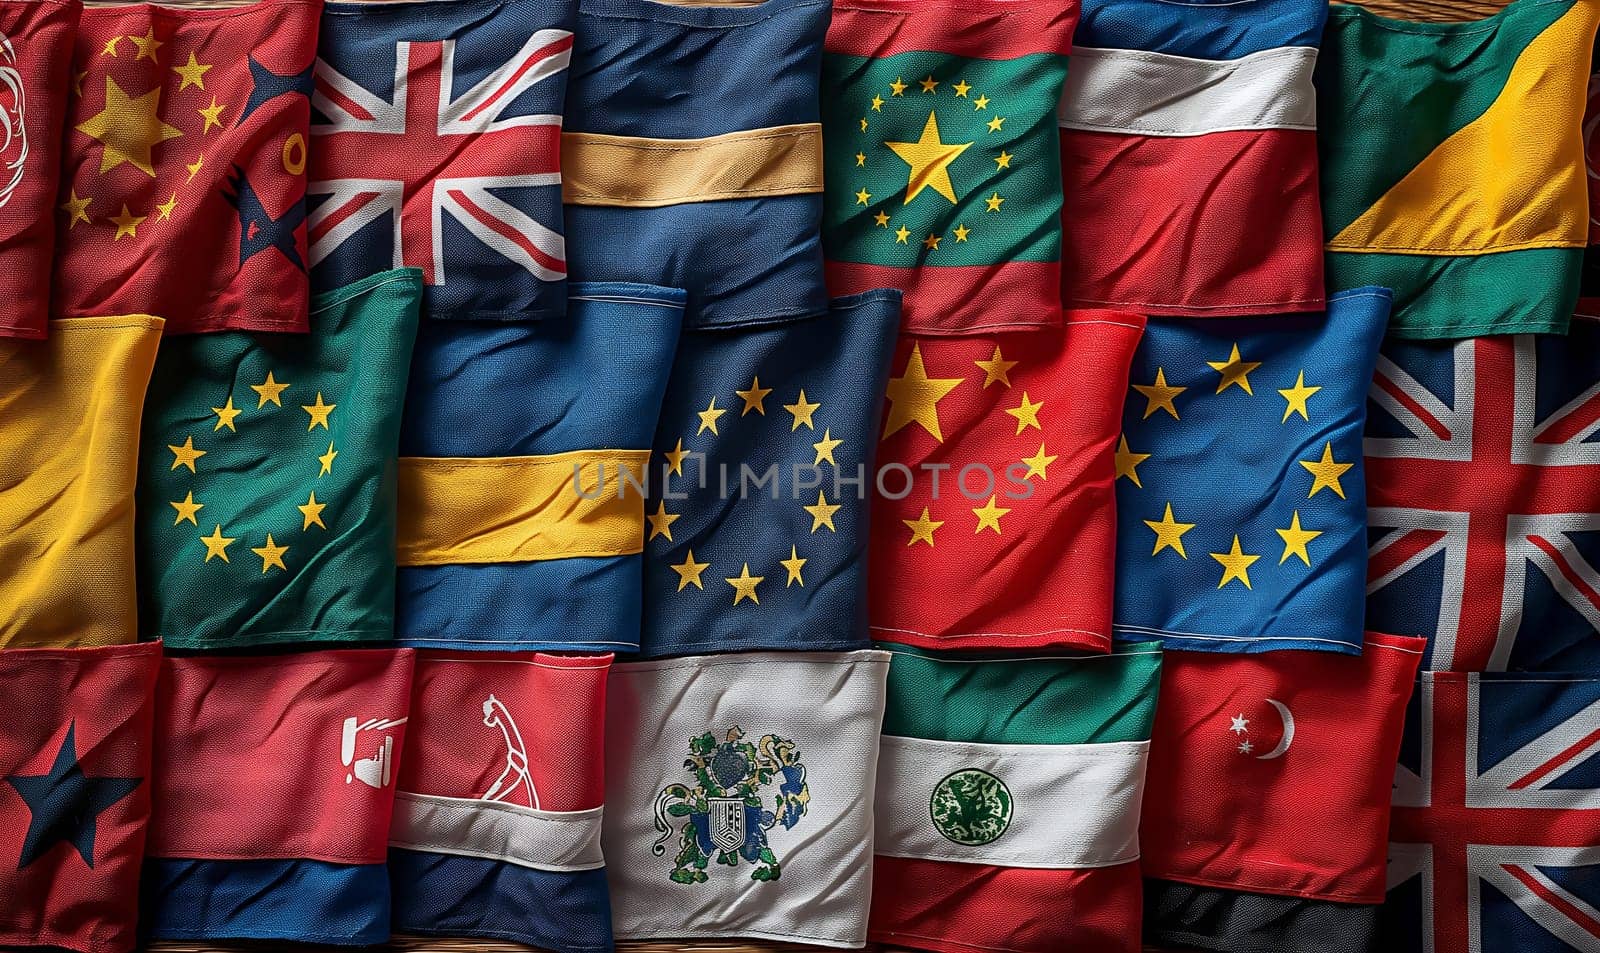 Assortment of World Flags Displayed Together by Fischeron